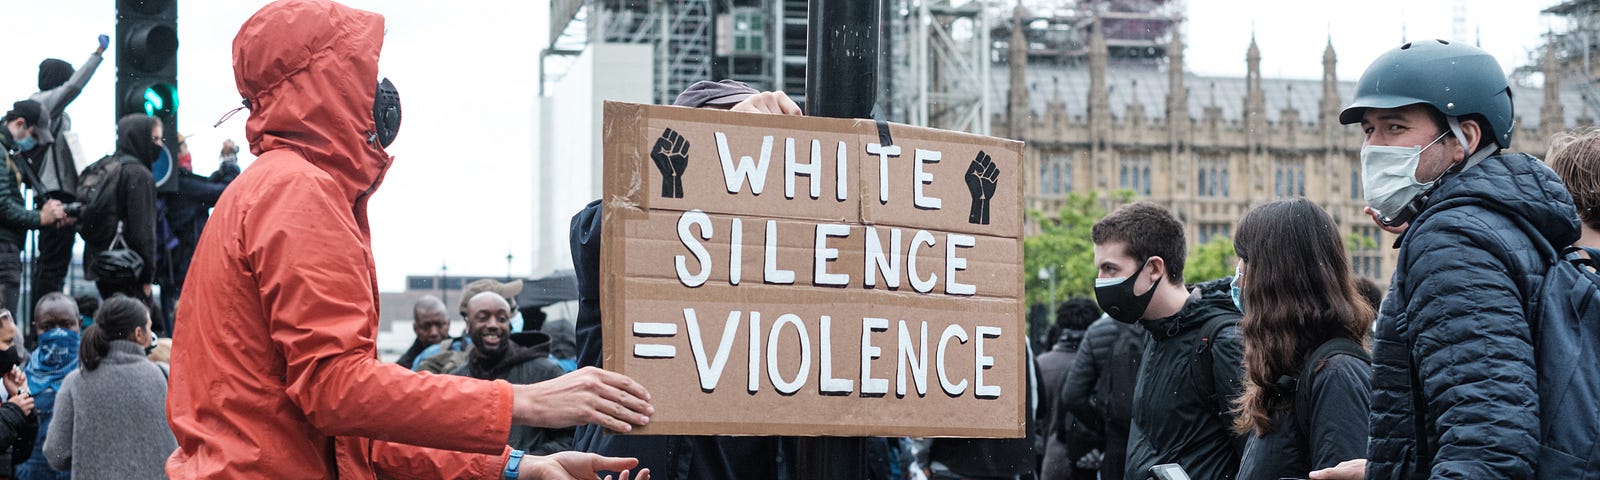 A masked white man holds a cardboard sign while white onlookers watch. The sign says “White Silence Equals Violence.”